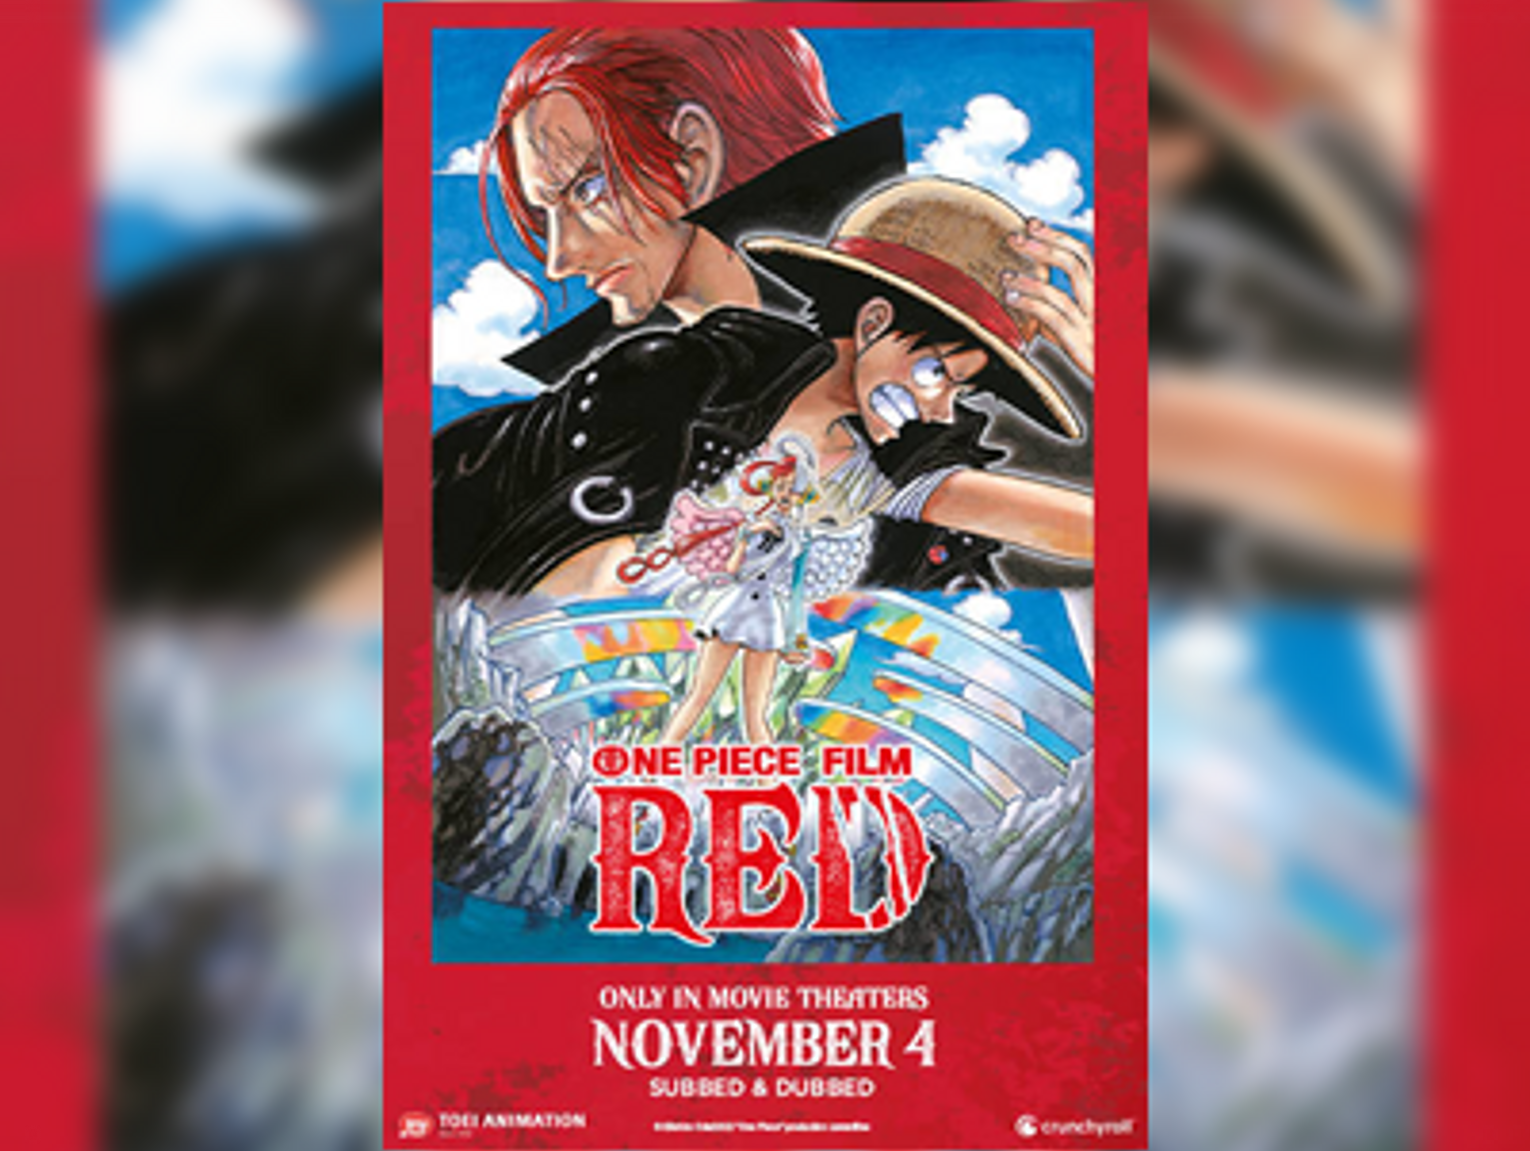 One Piece Film: Red Review